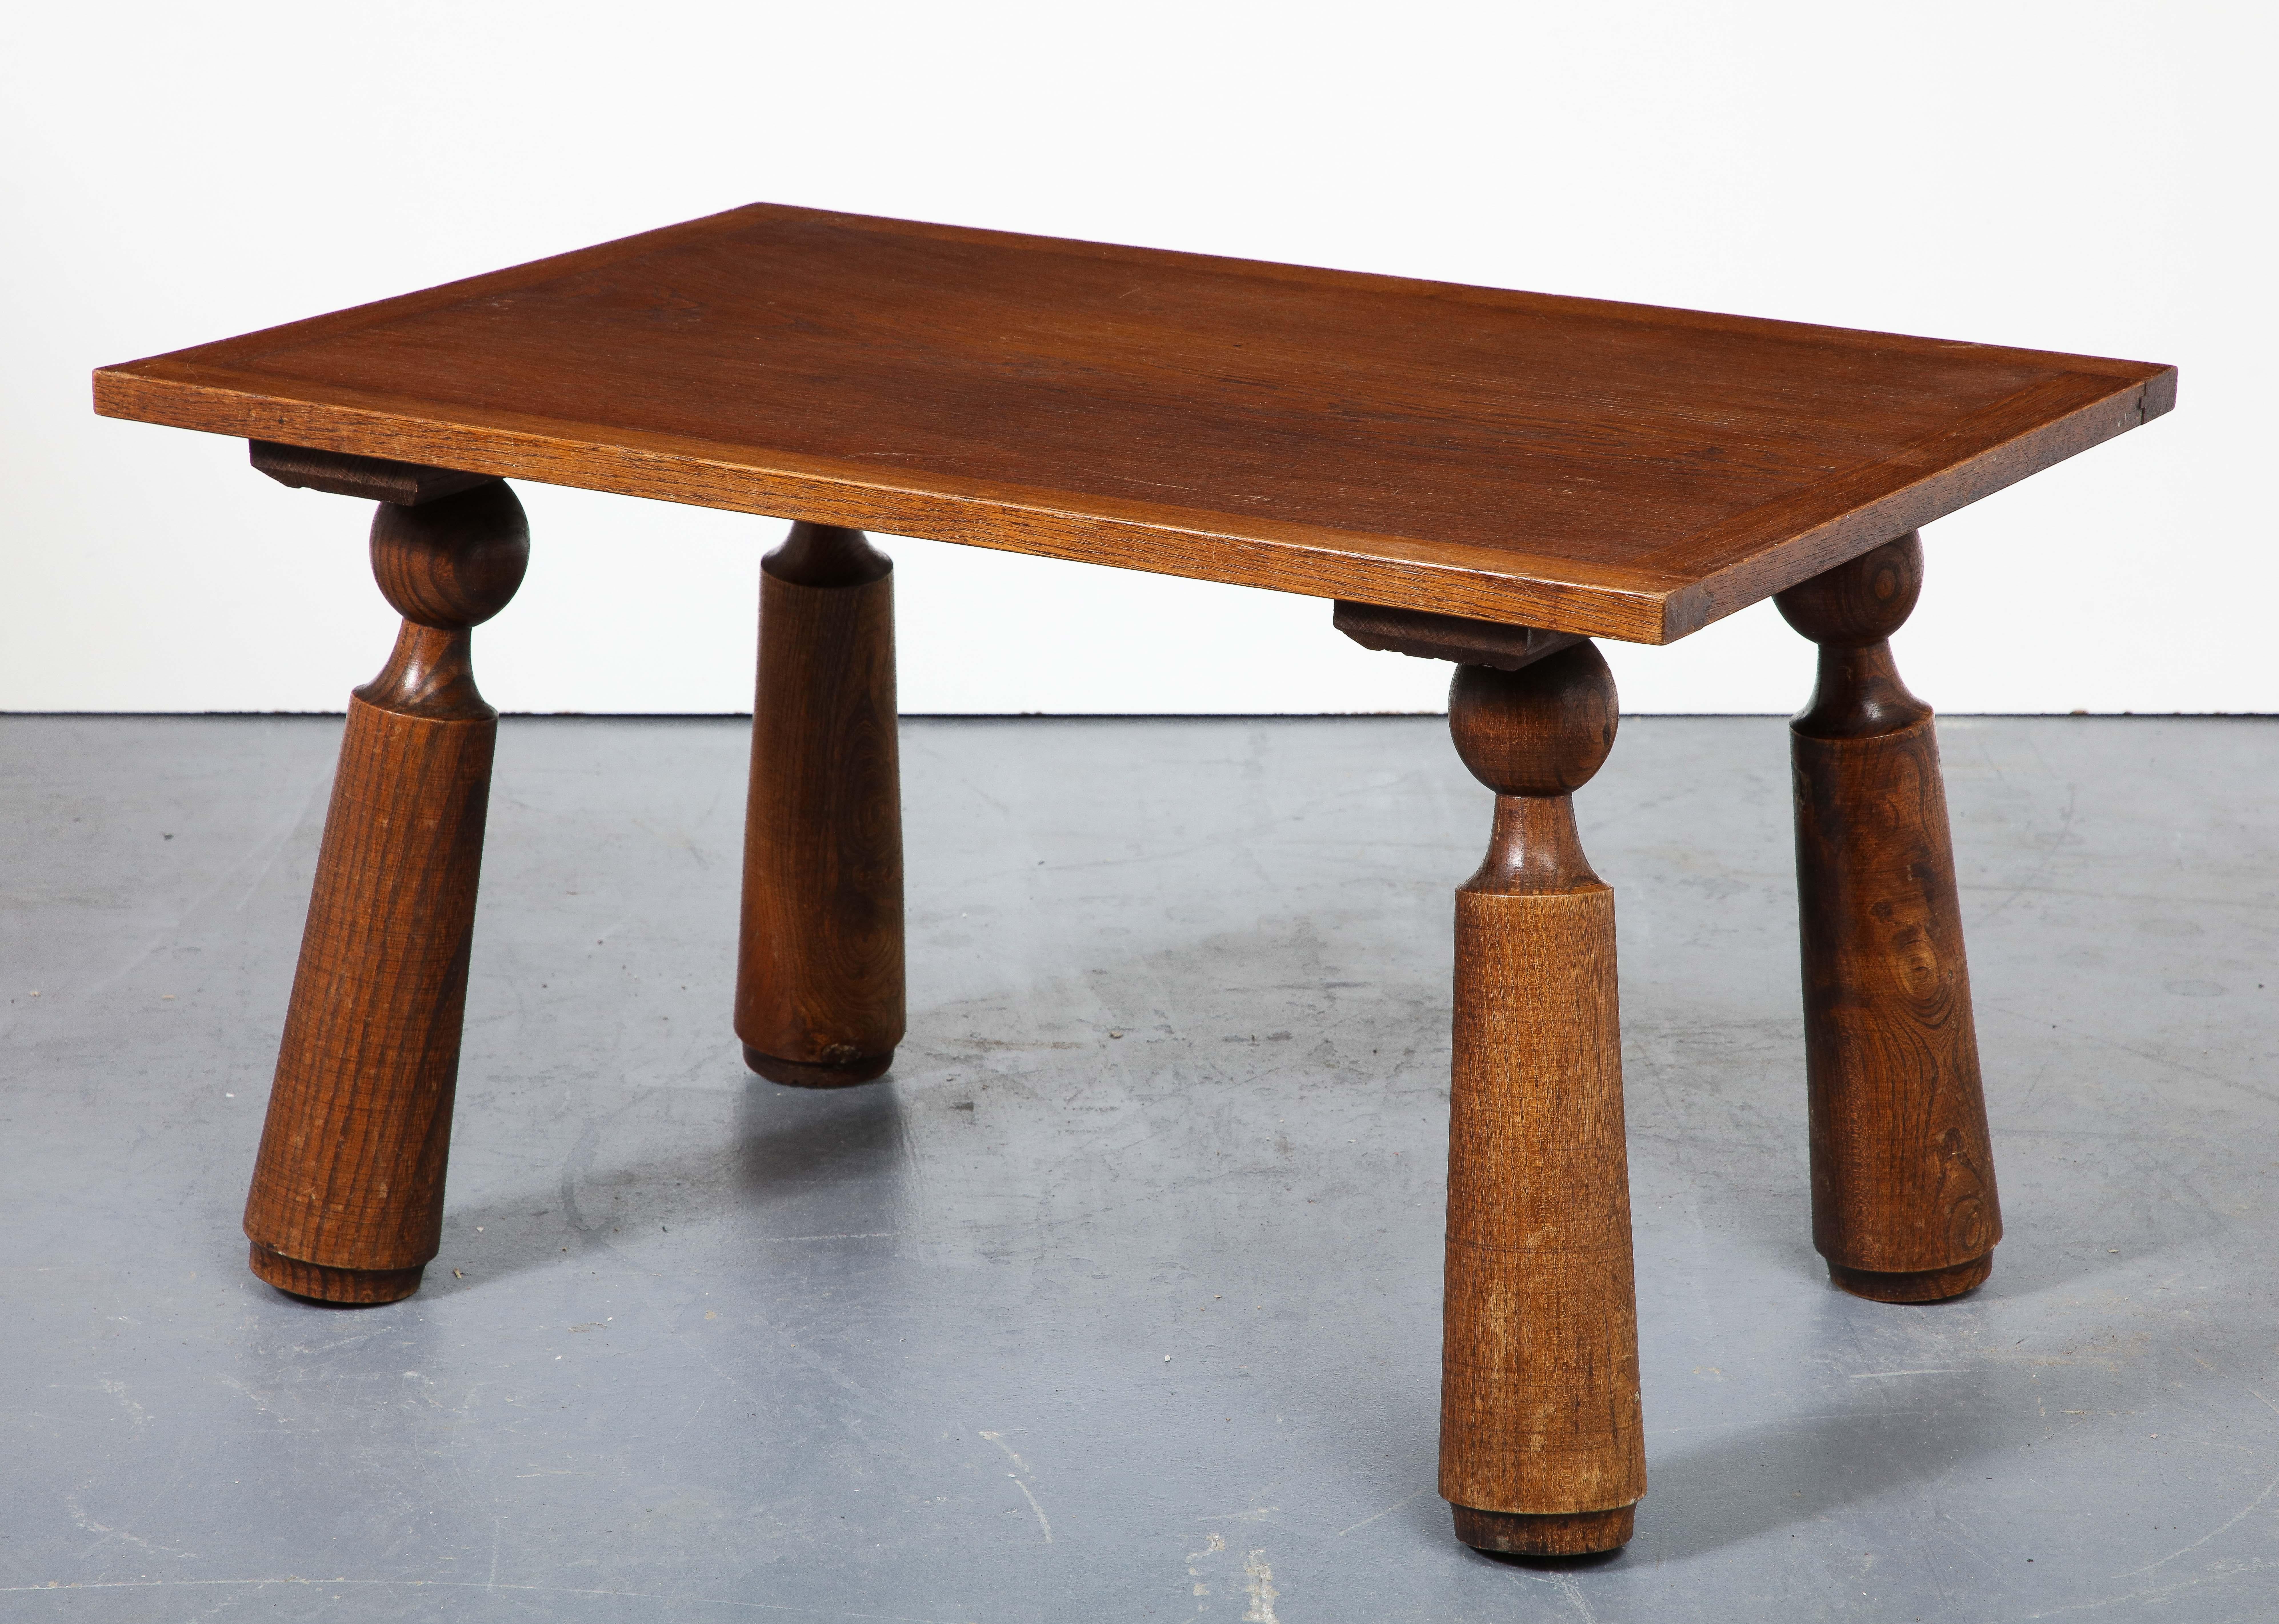 Solid oak coffee table with distinctive, hand-turned legs; beautifully patinated.